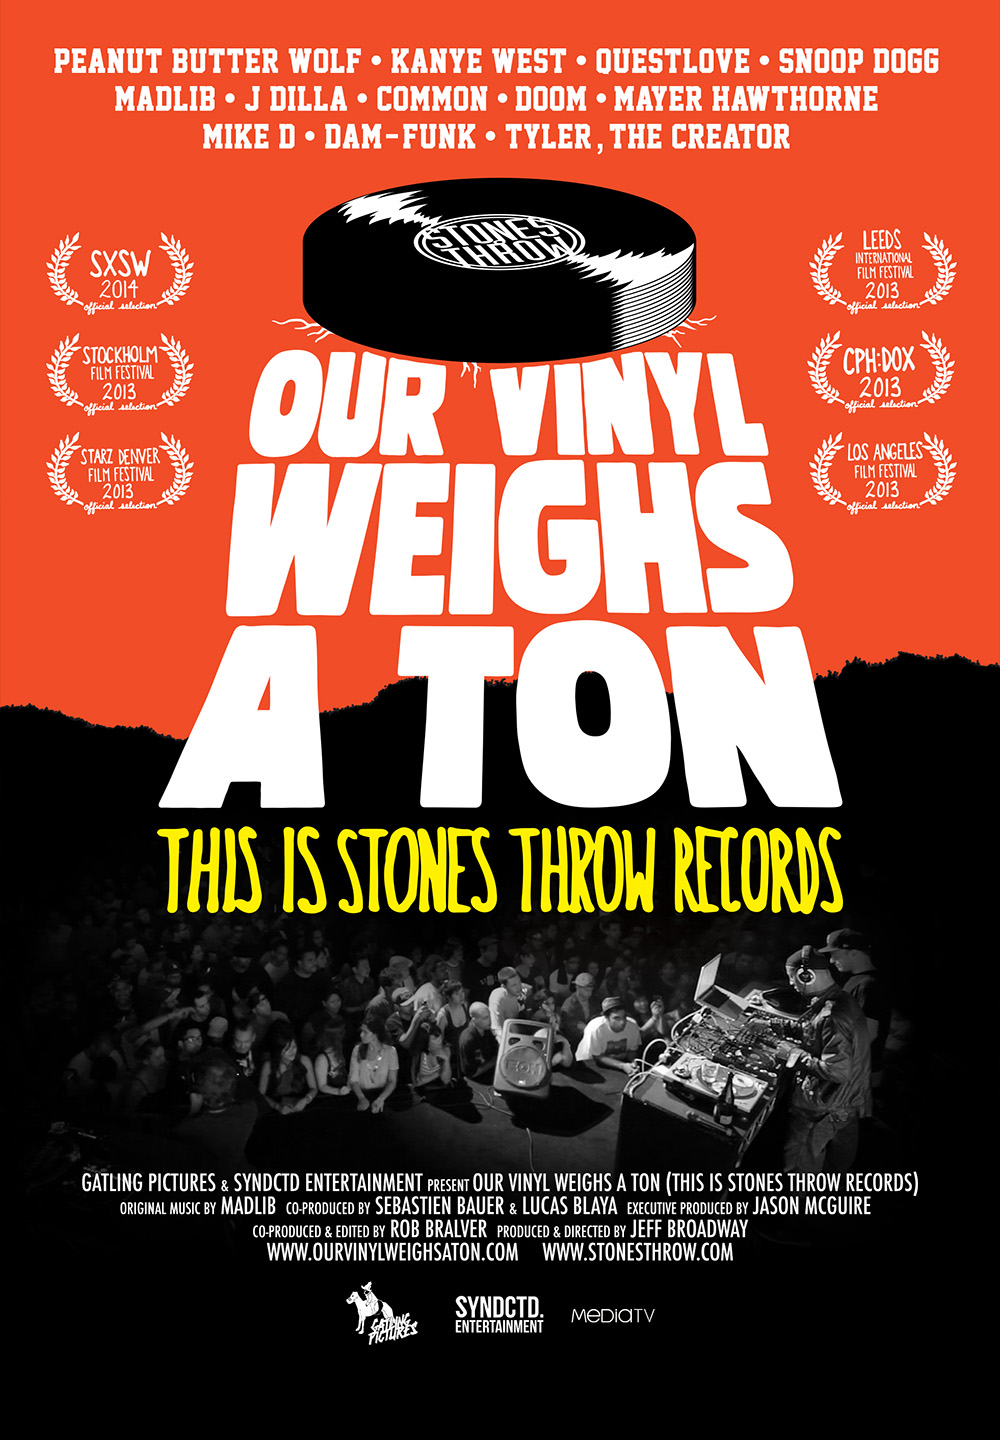 Frische Alben im Atomlabor | What´s hot end of May - Our Vinyl Weights a Ton ( Stones Throw Dokumentation 'THIS IS STONES THROW RECORDS' und Soundtrack ) und Illy x 50 Cent Album Release